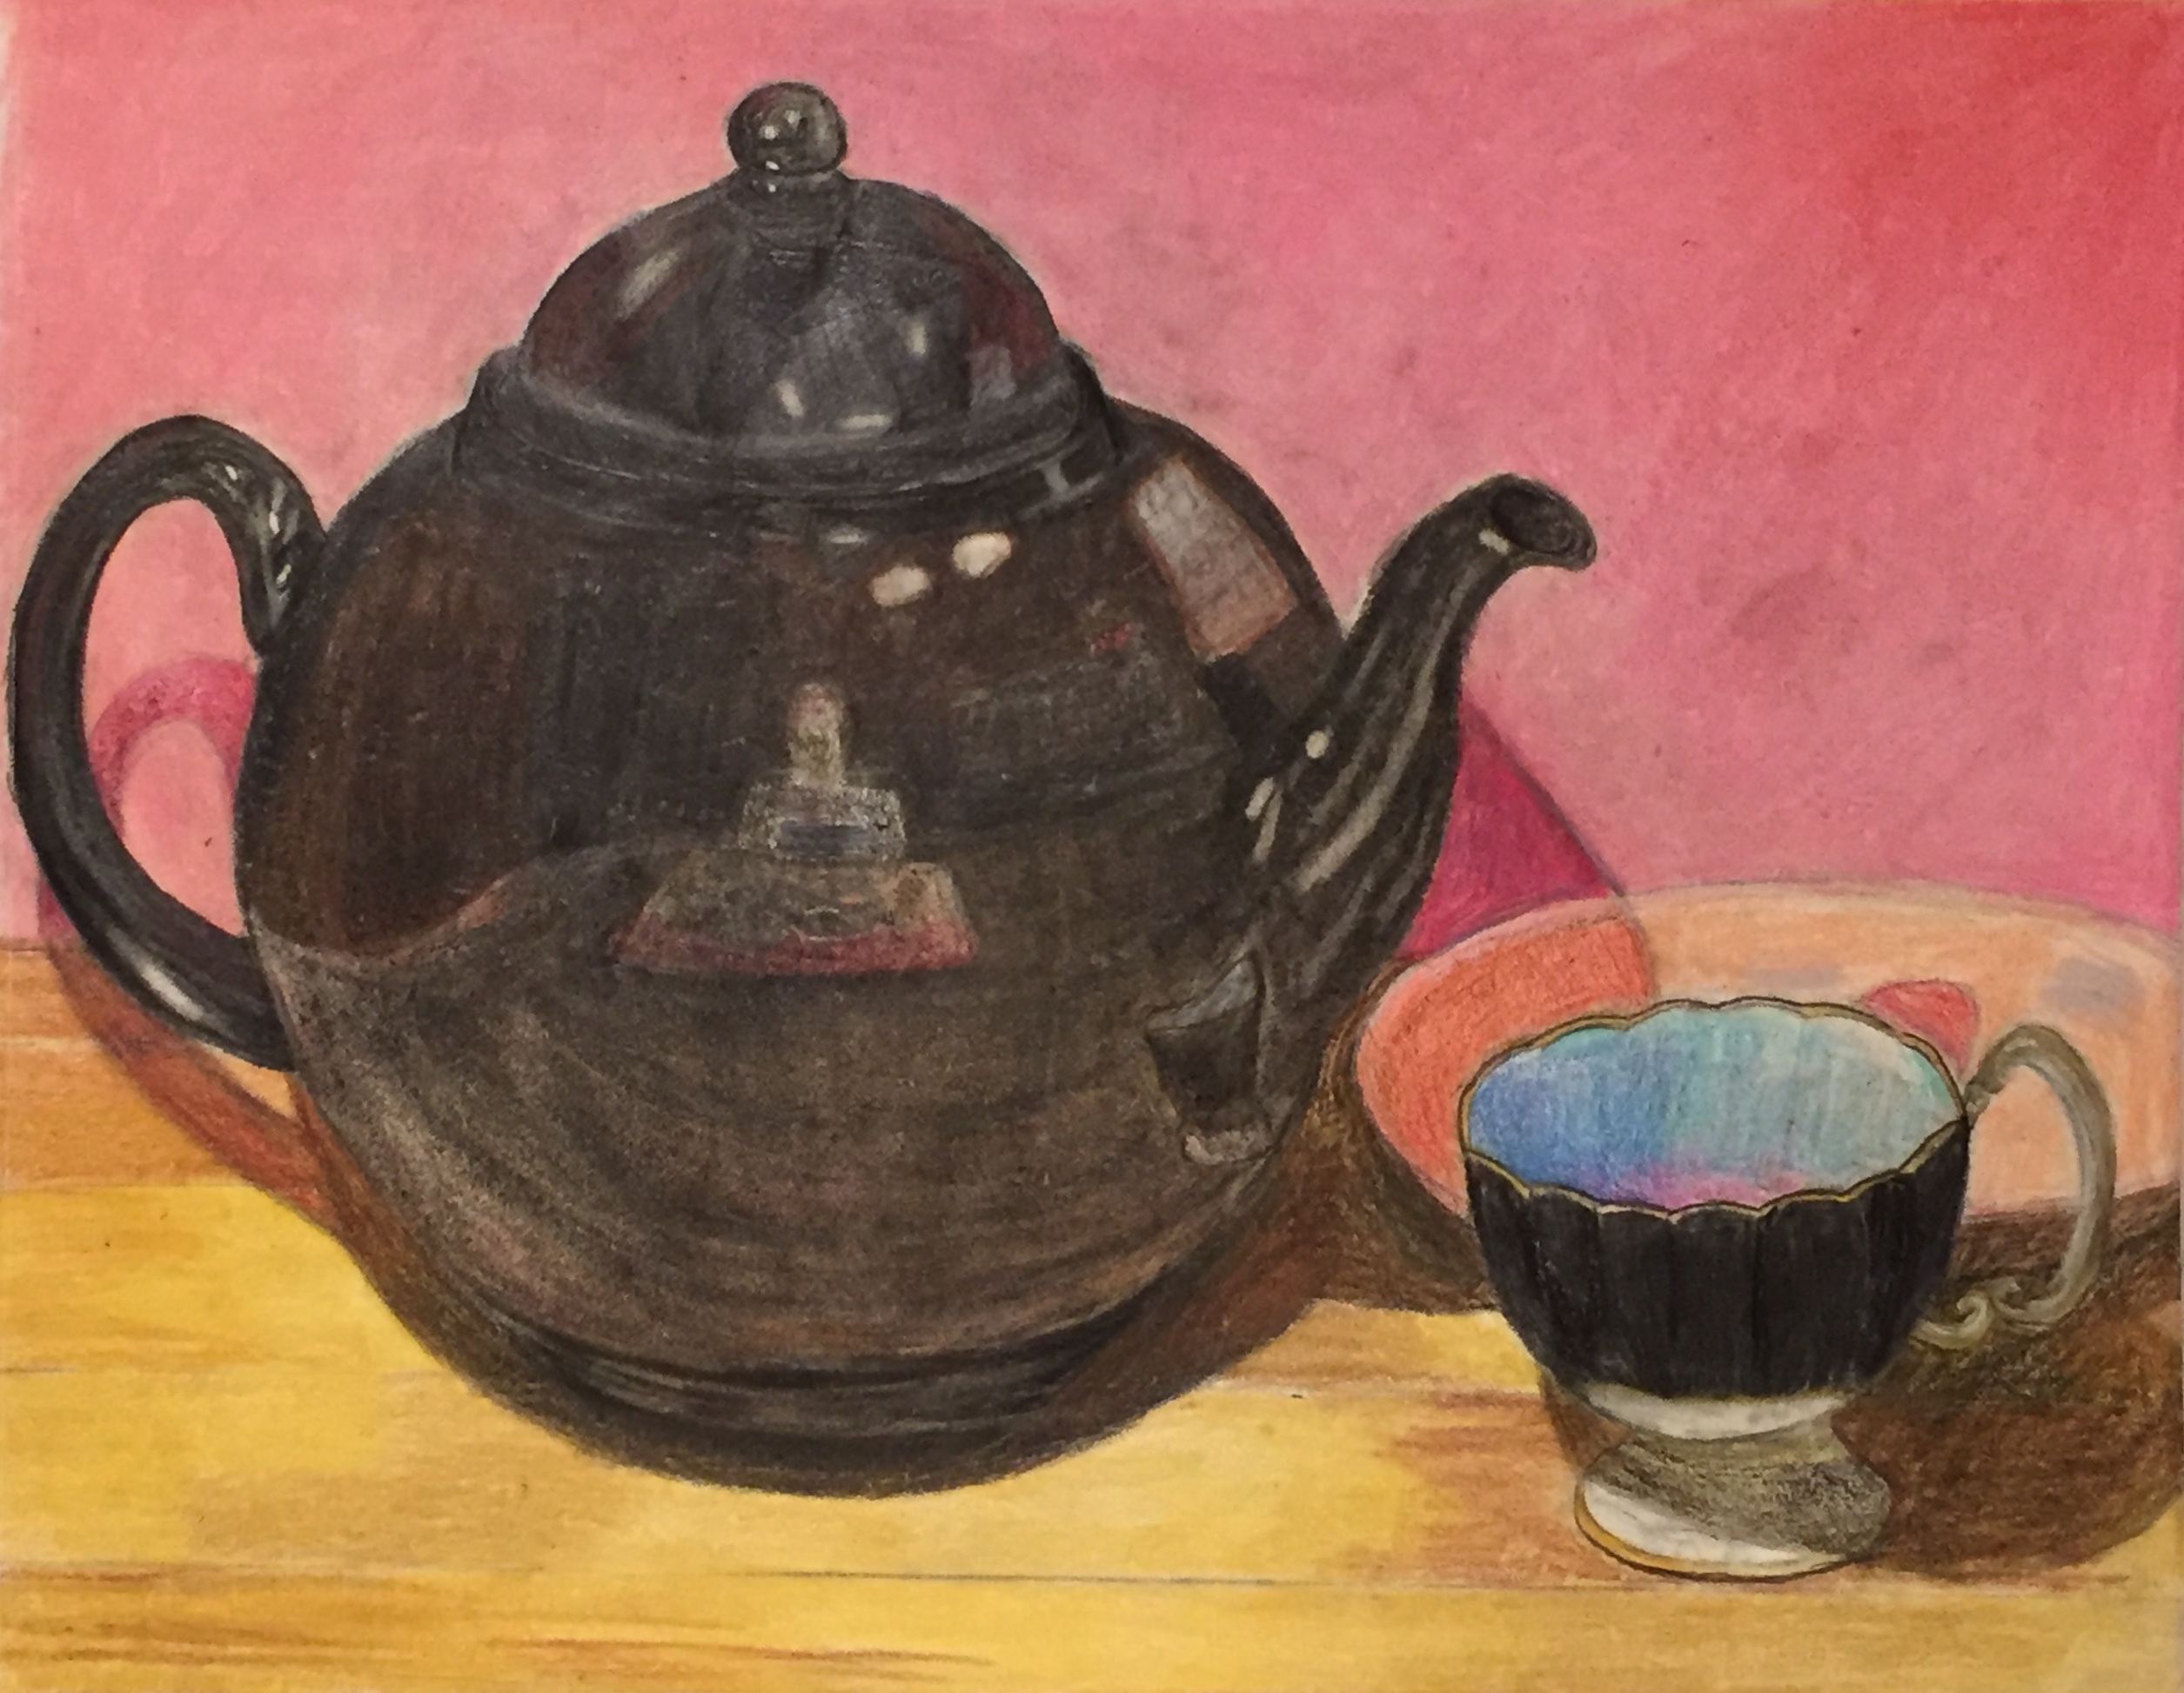 View Image Details Still Life in watercolor